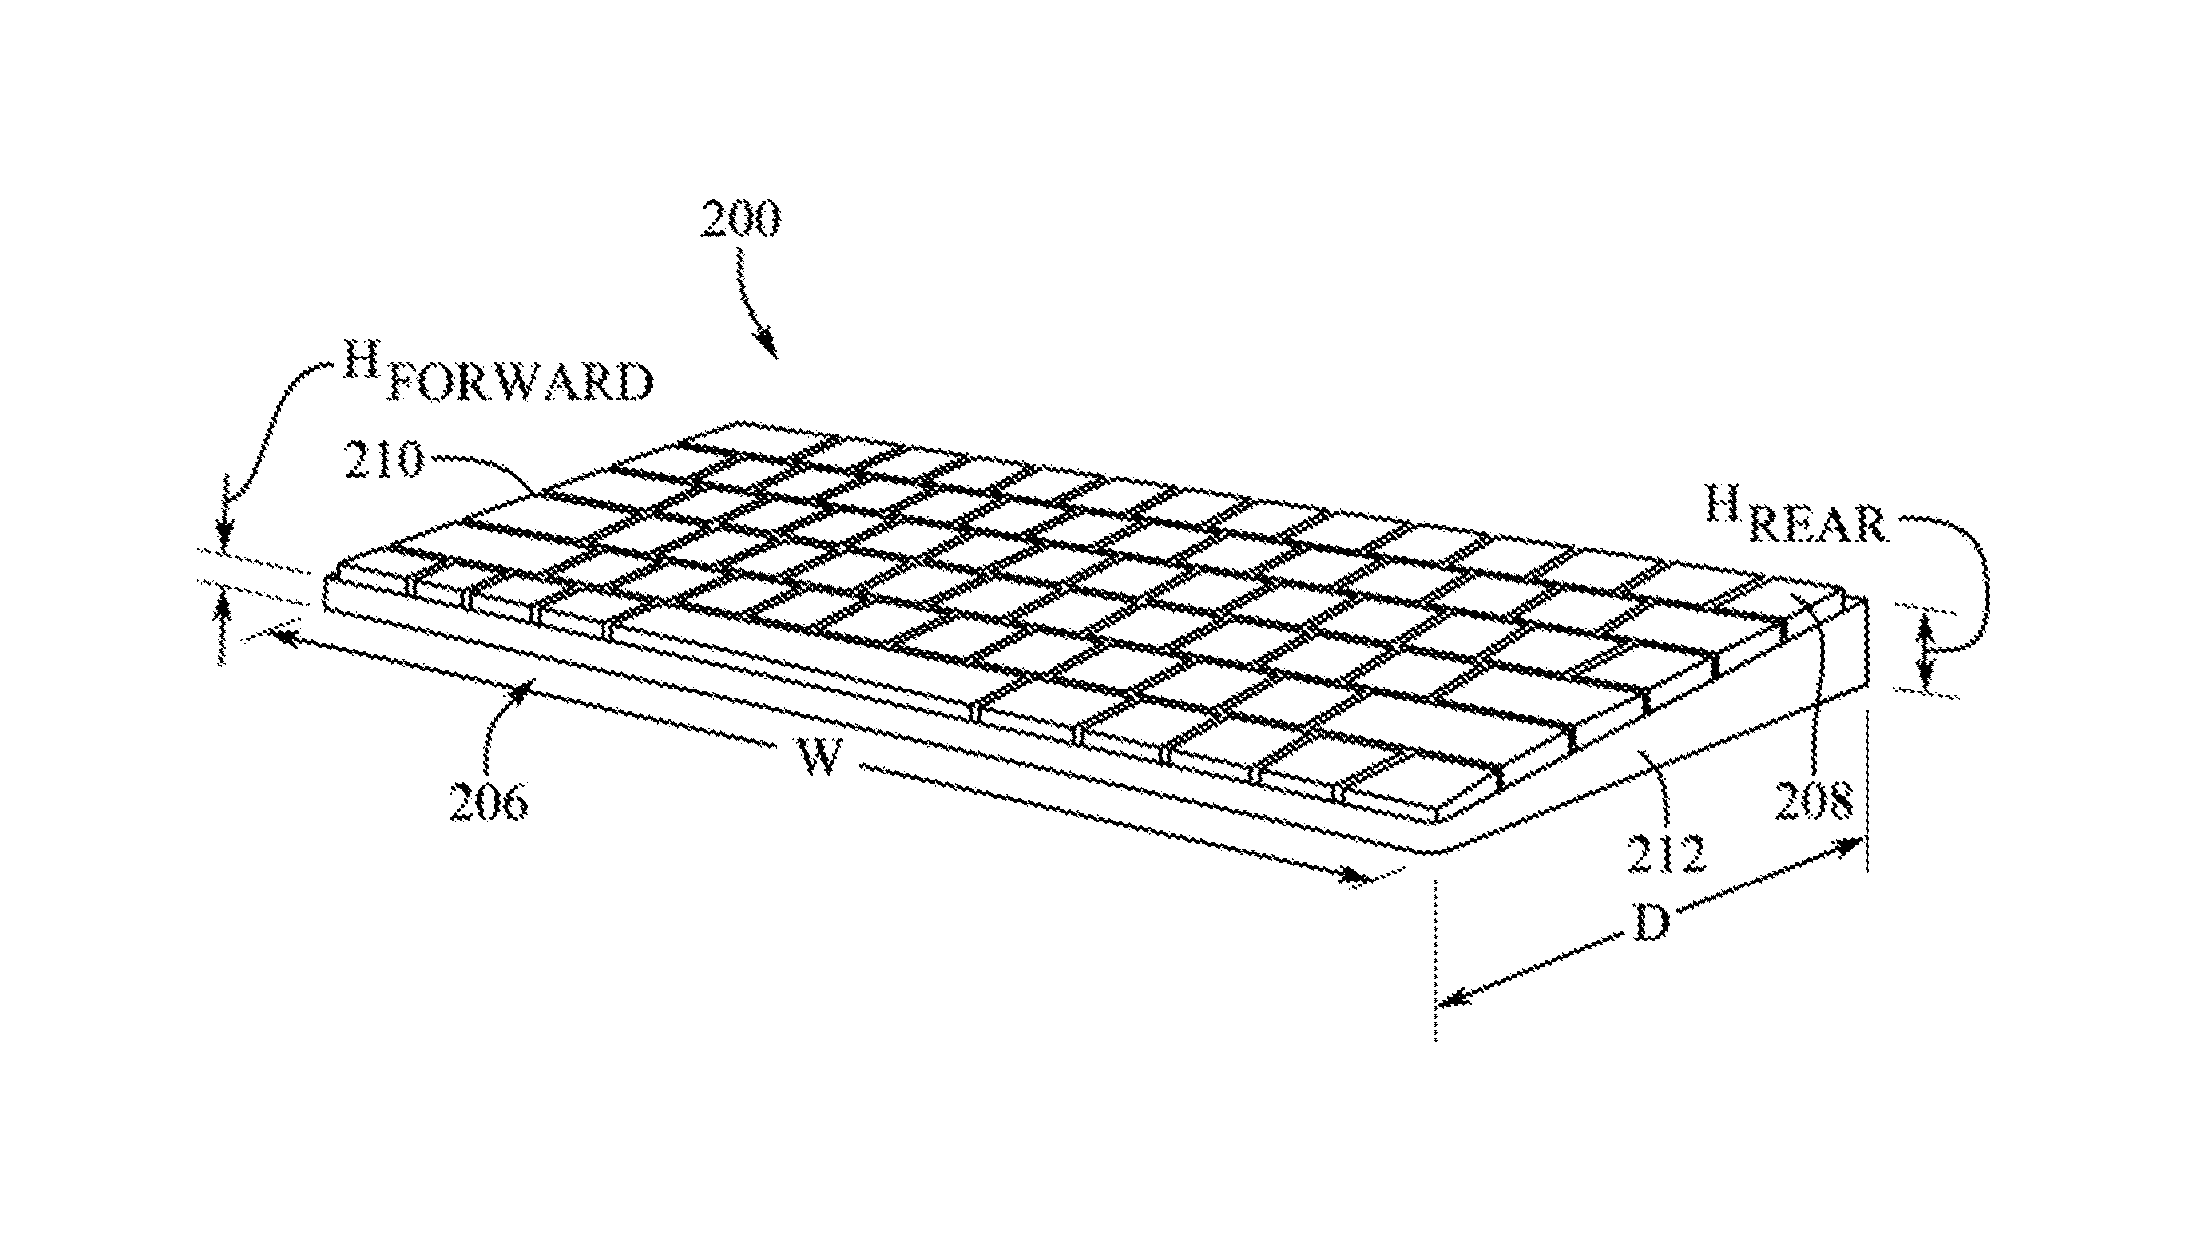 A patent drawing filed as part of Apple's USPTO patent application for a computer in an input device which details how the company could integrate a whole Mac inside a Magic Keyboard. The drawing depicts an isometric view of a hybrid device which resembles a thicker Magic Keyboard